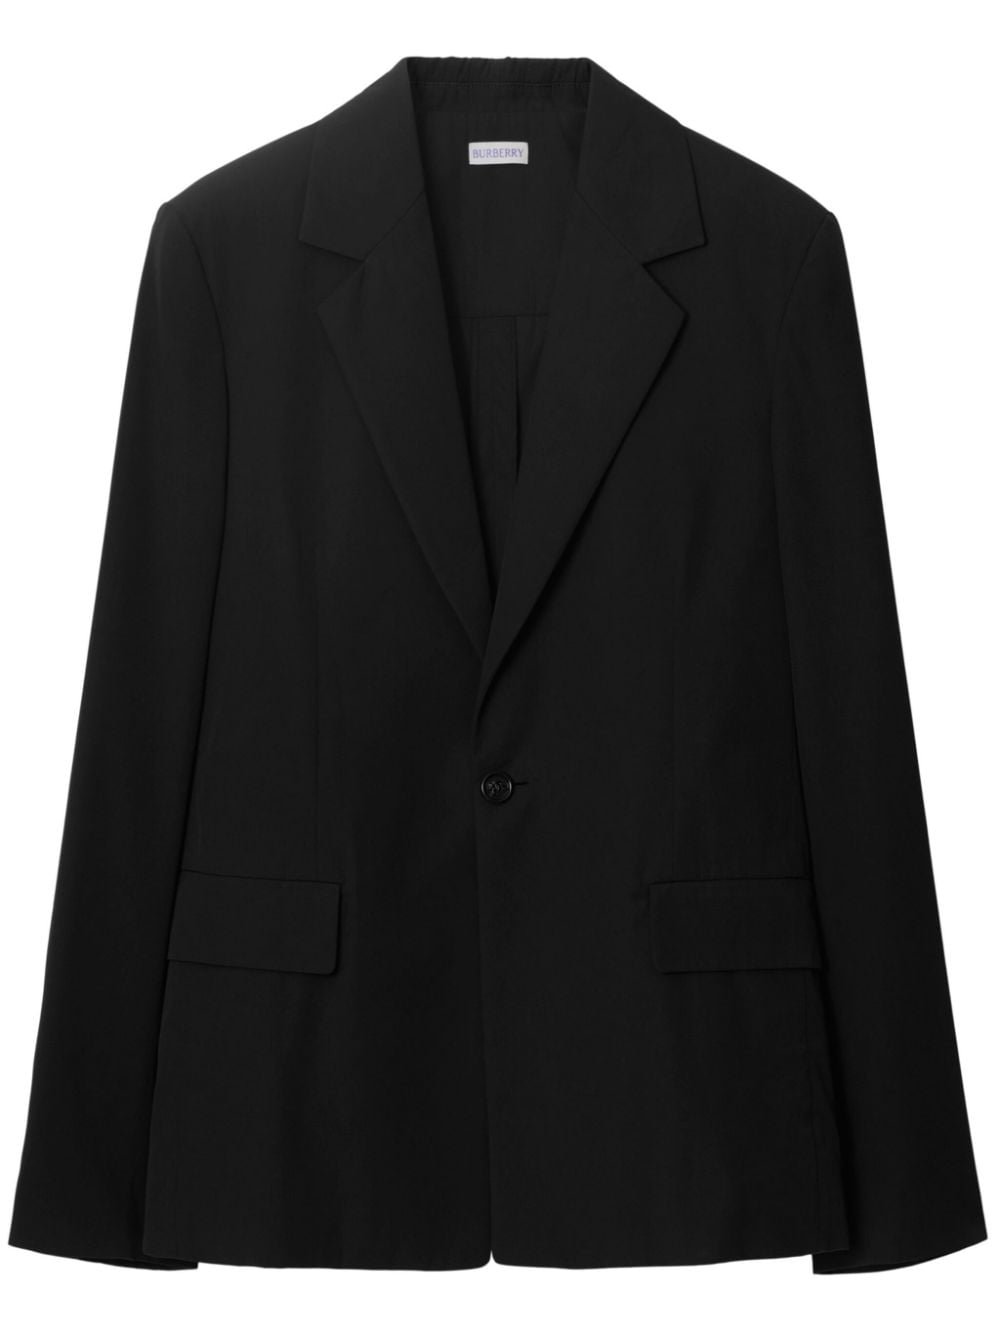 Image 1 of Burberry single-breasted wool blazer